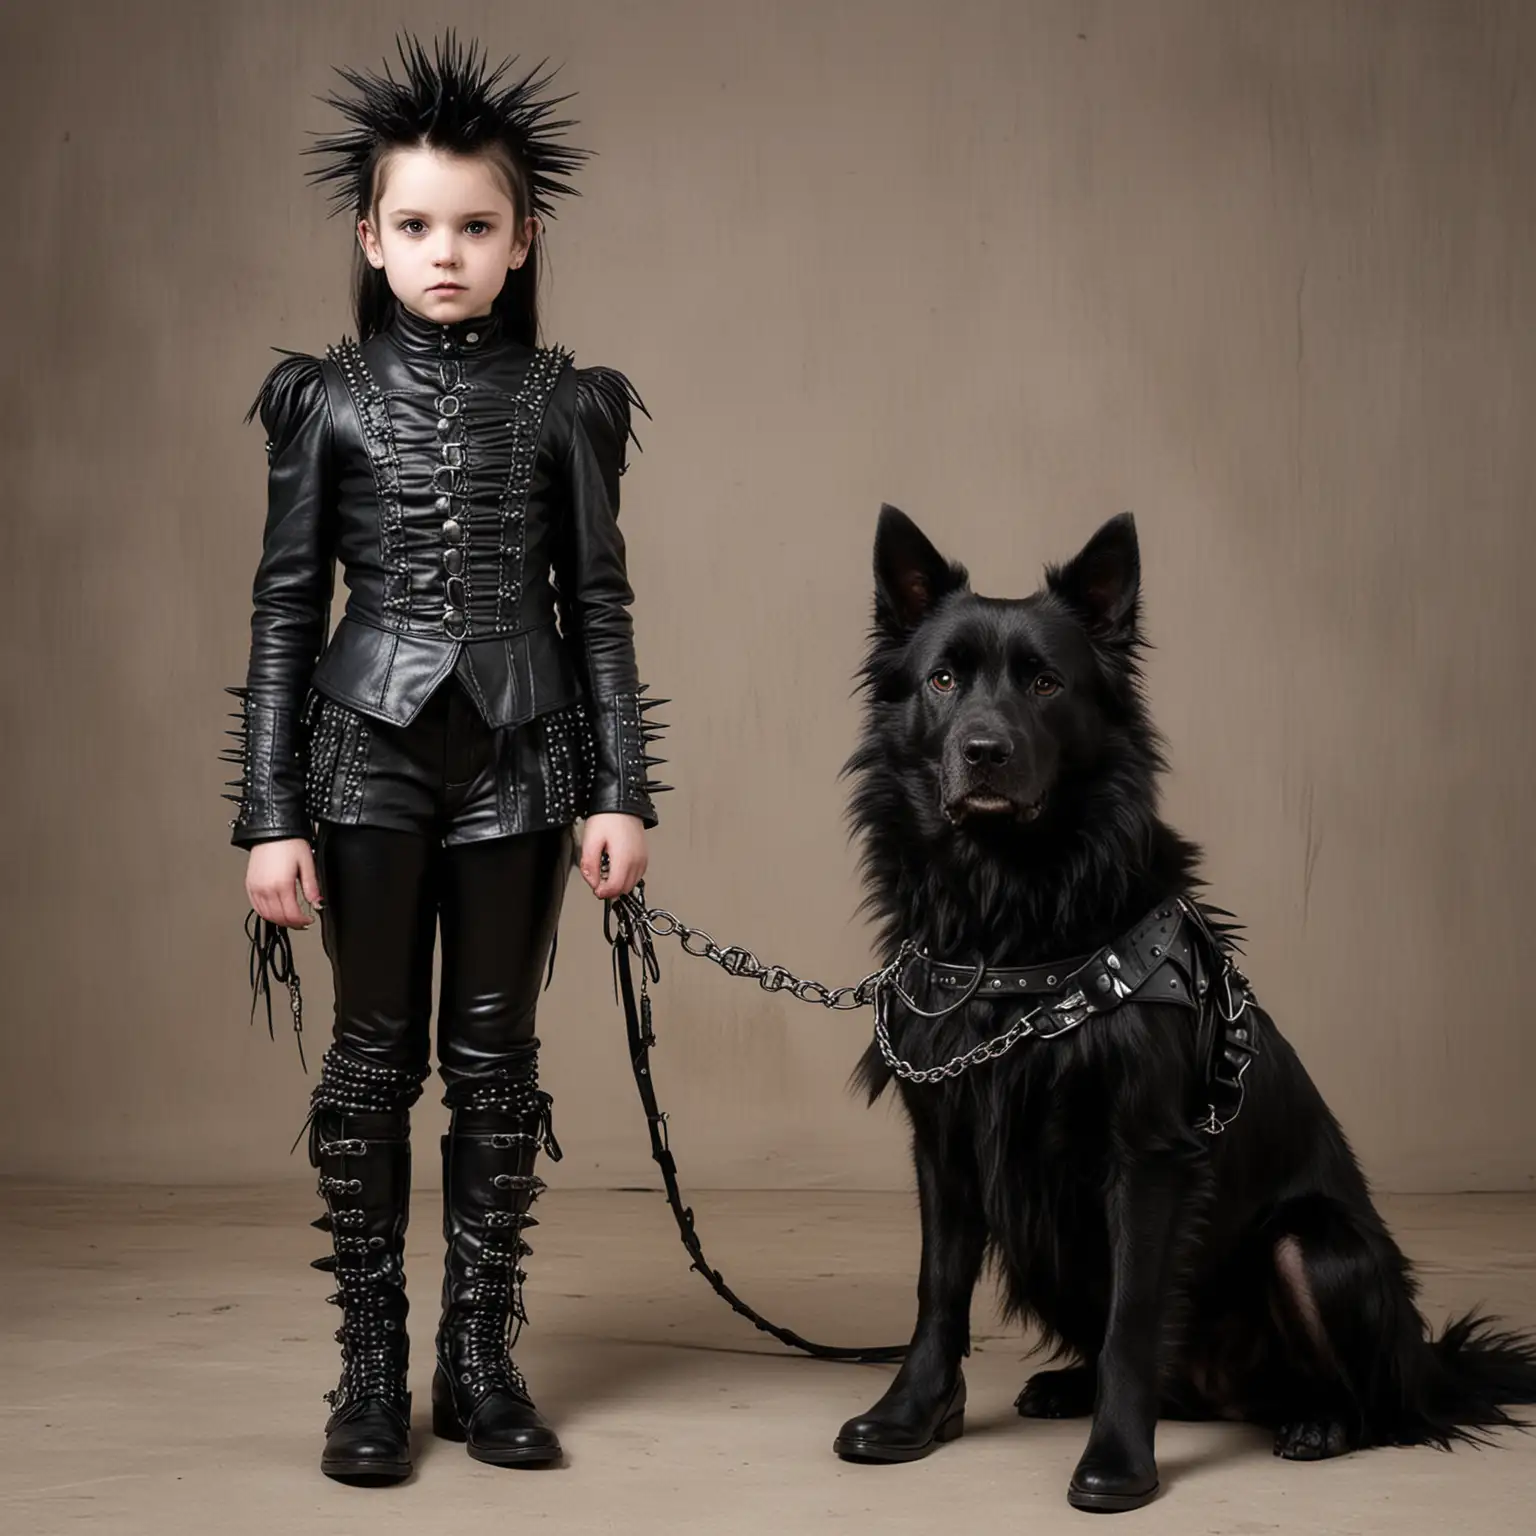 9 year old goth princess, spiky leather clothing, leash with one large dog